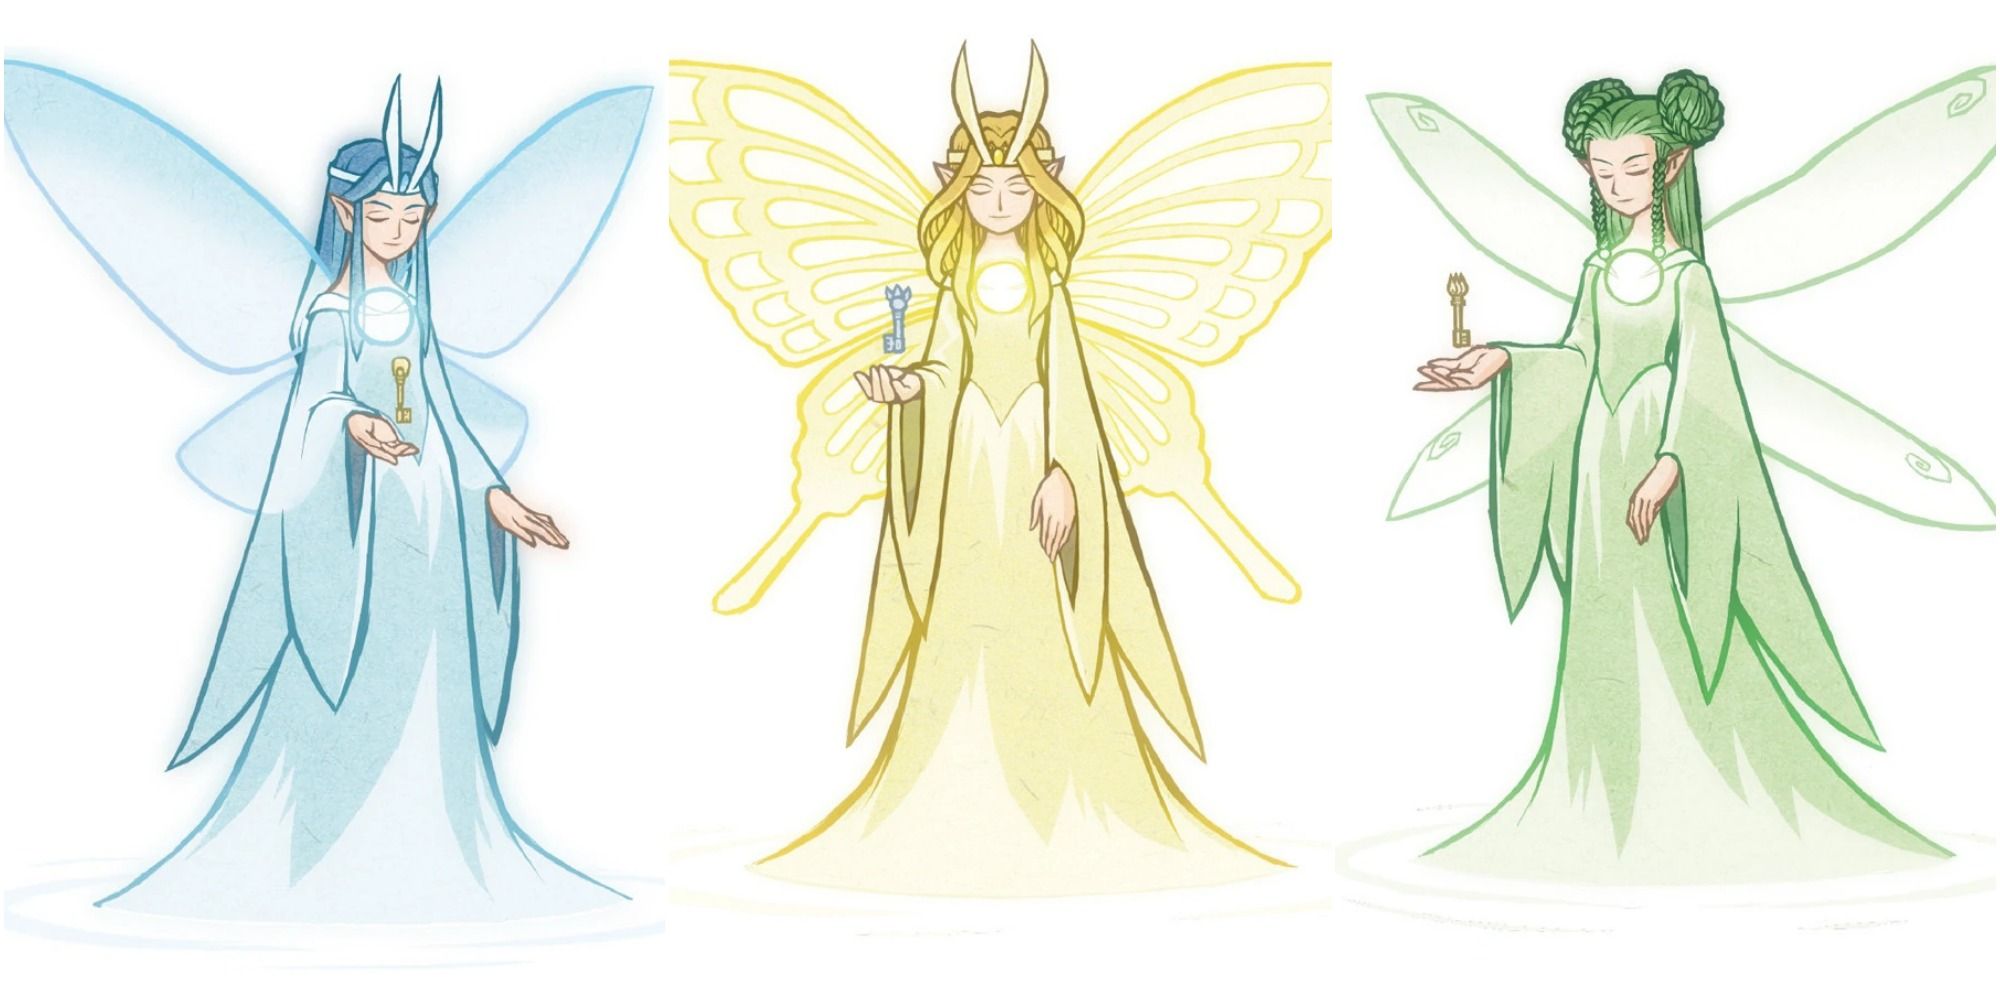 Image of the Great Fairy of Ice, the Great Fairy of Flame and the Great Fairy of Forest each holding a key.